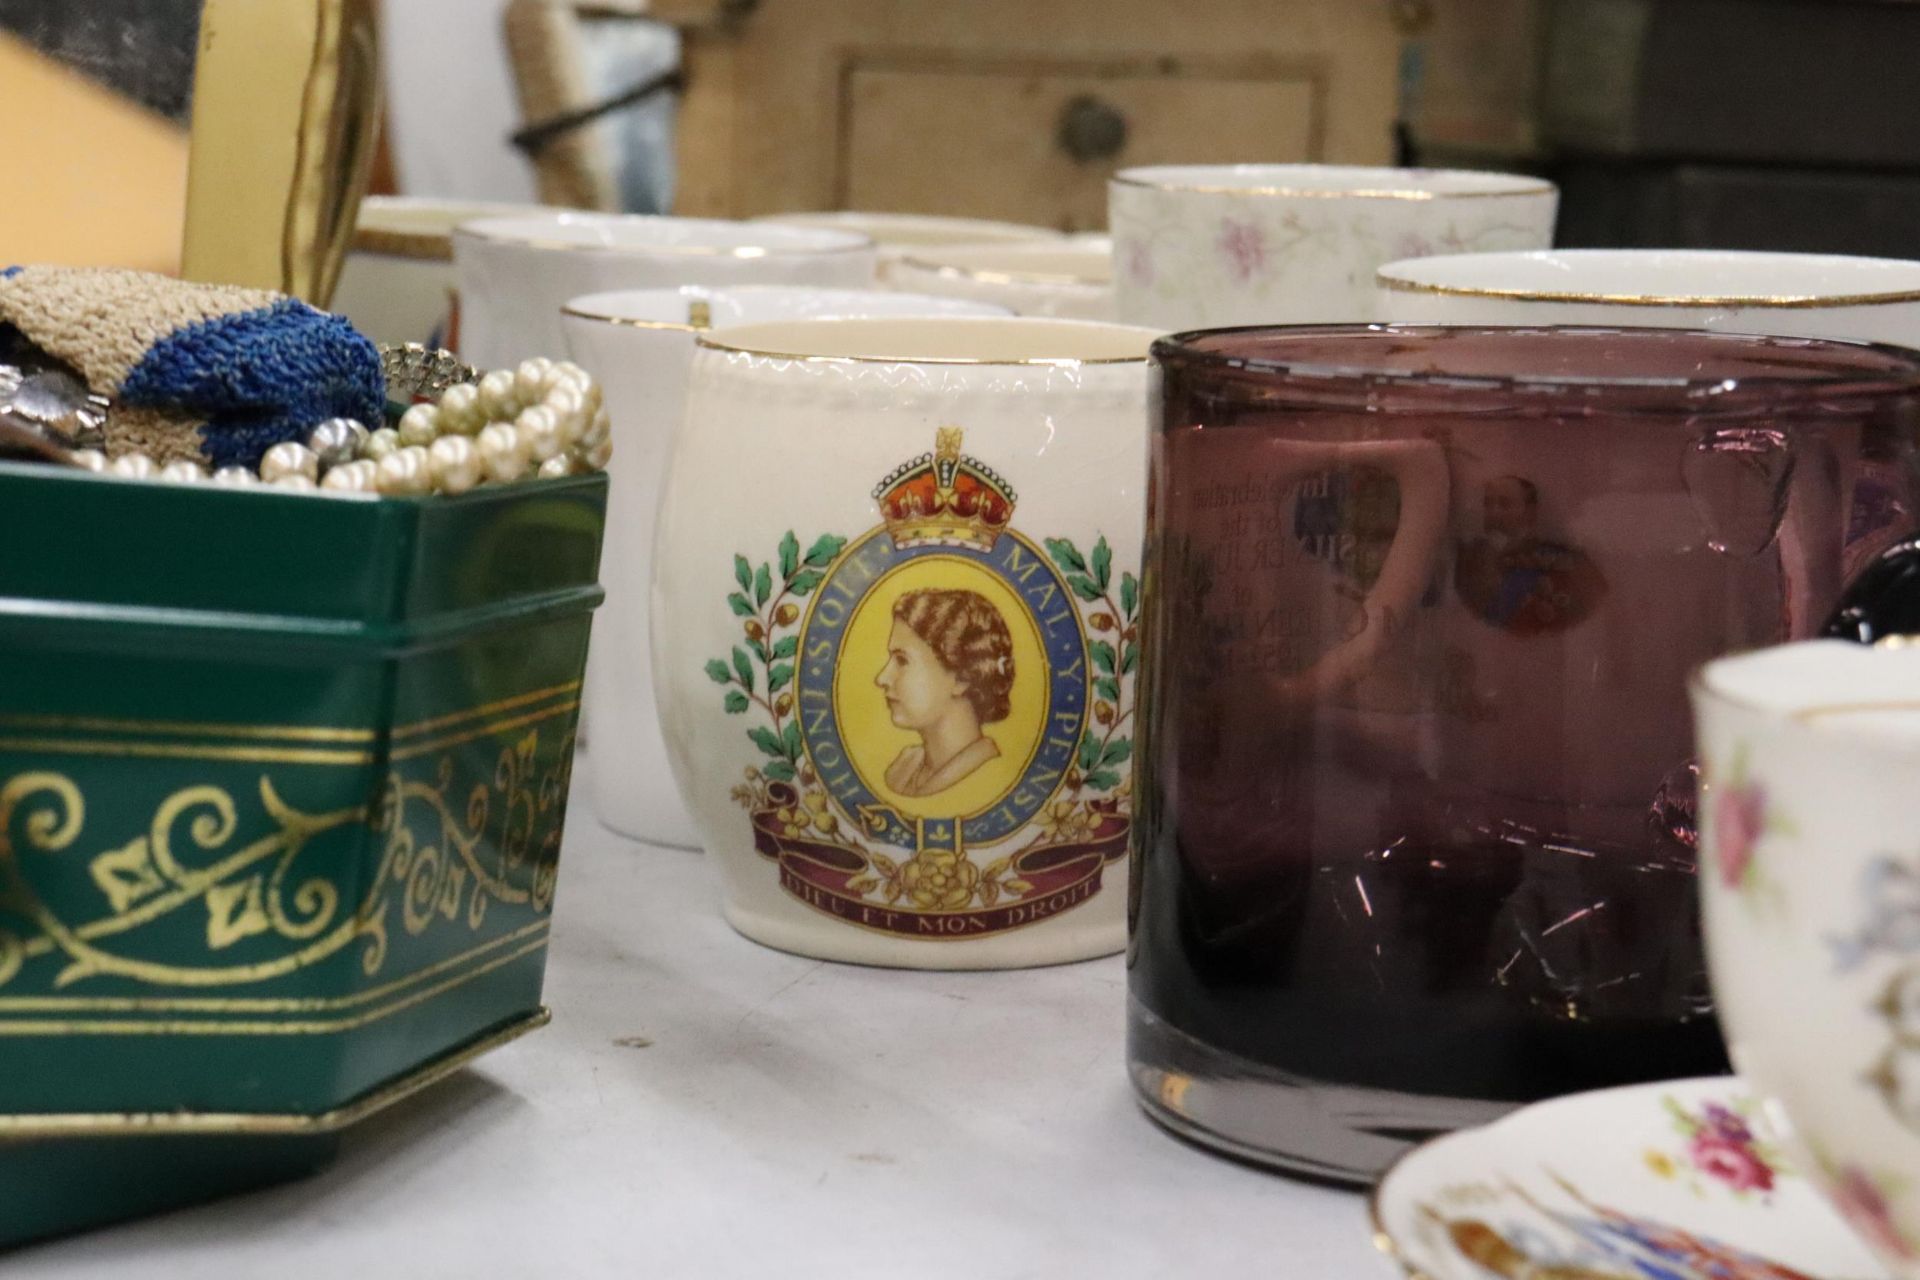 A COLLECTION OF ROYAL COMMEMORATIVE ITEMS TO INCLUDE CUPS, PLATES, PLUS GUINNESS CERAMICS - Image 7 of 11